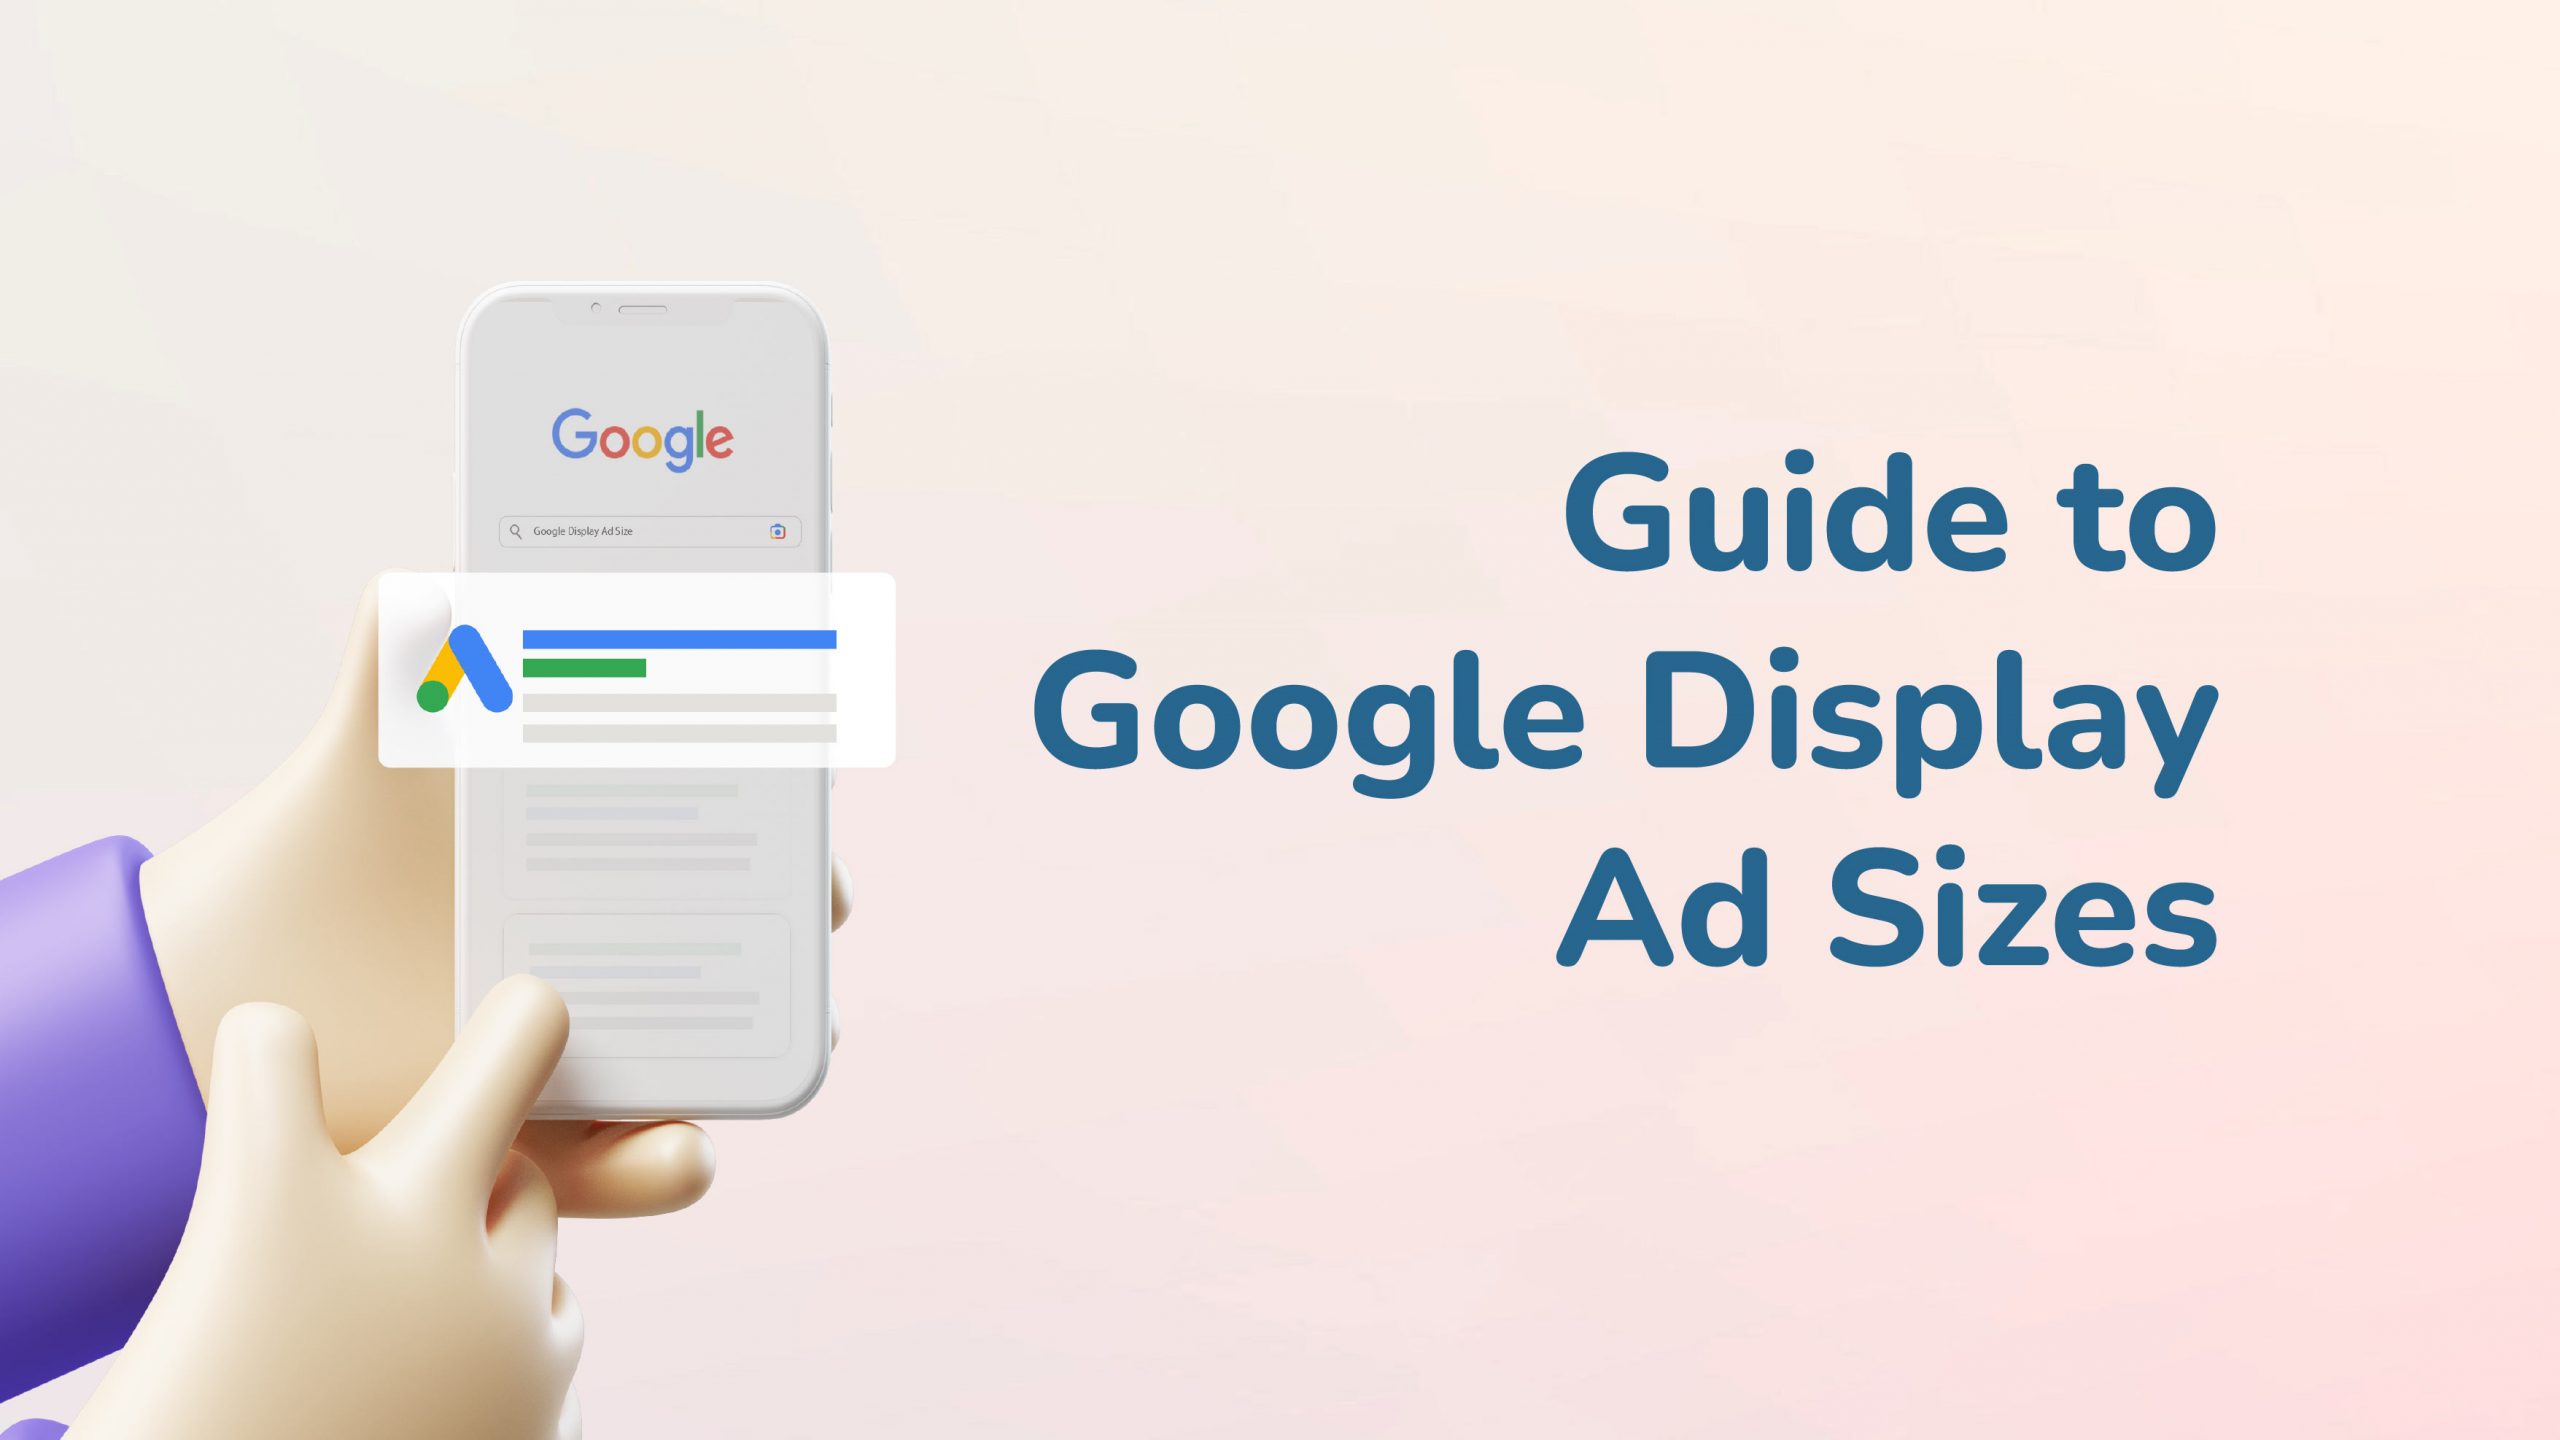 Guide to Google Display Ad Sizes